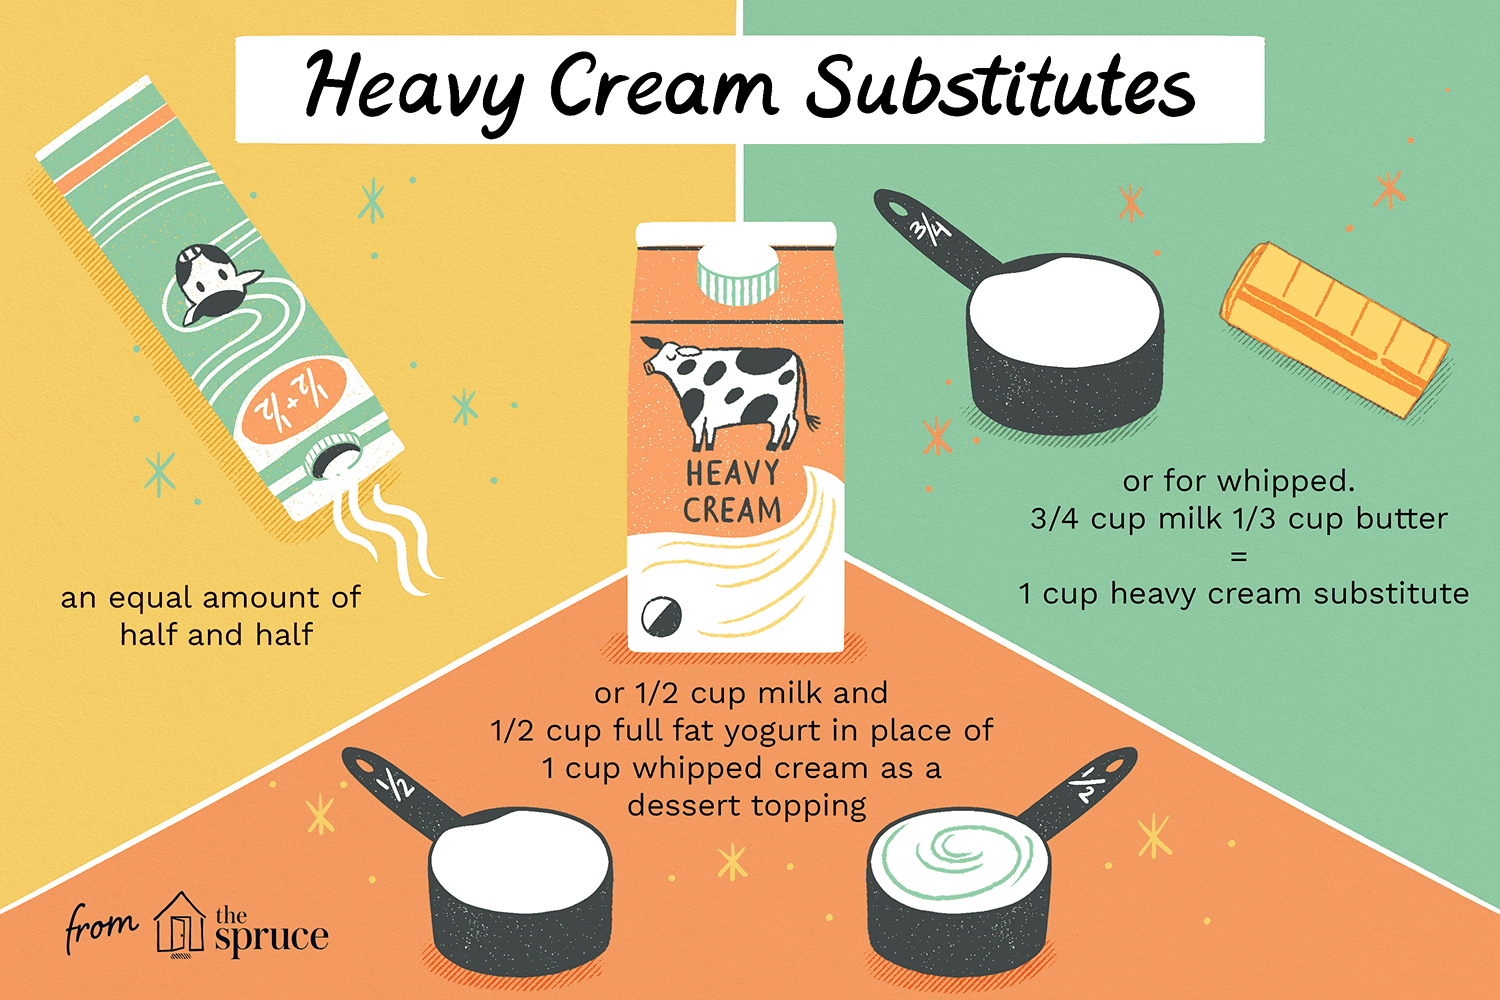 Can Half and Half Be Substituted For Heavy Cream?